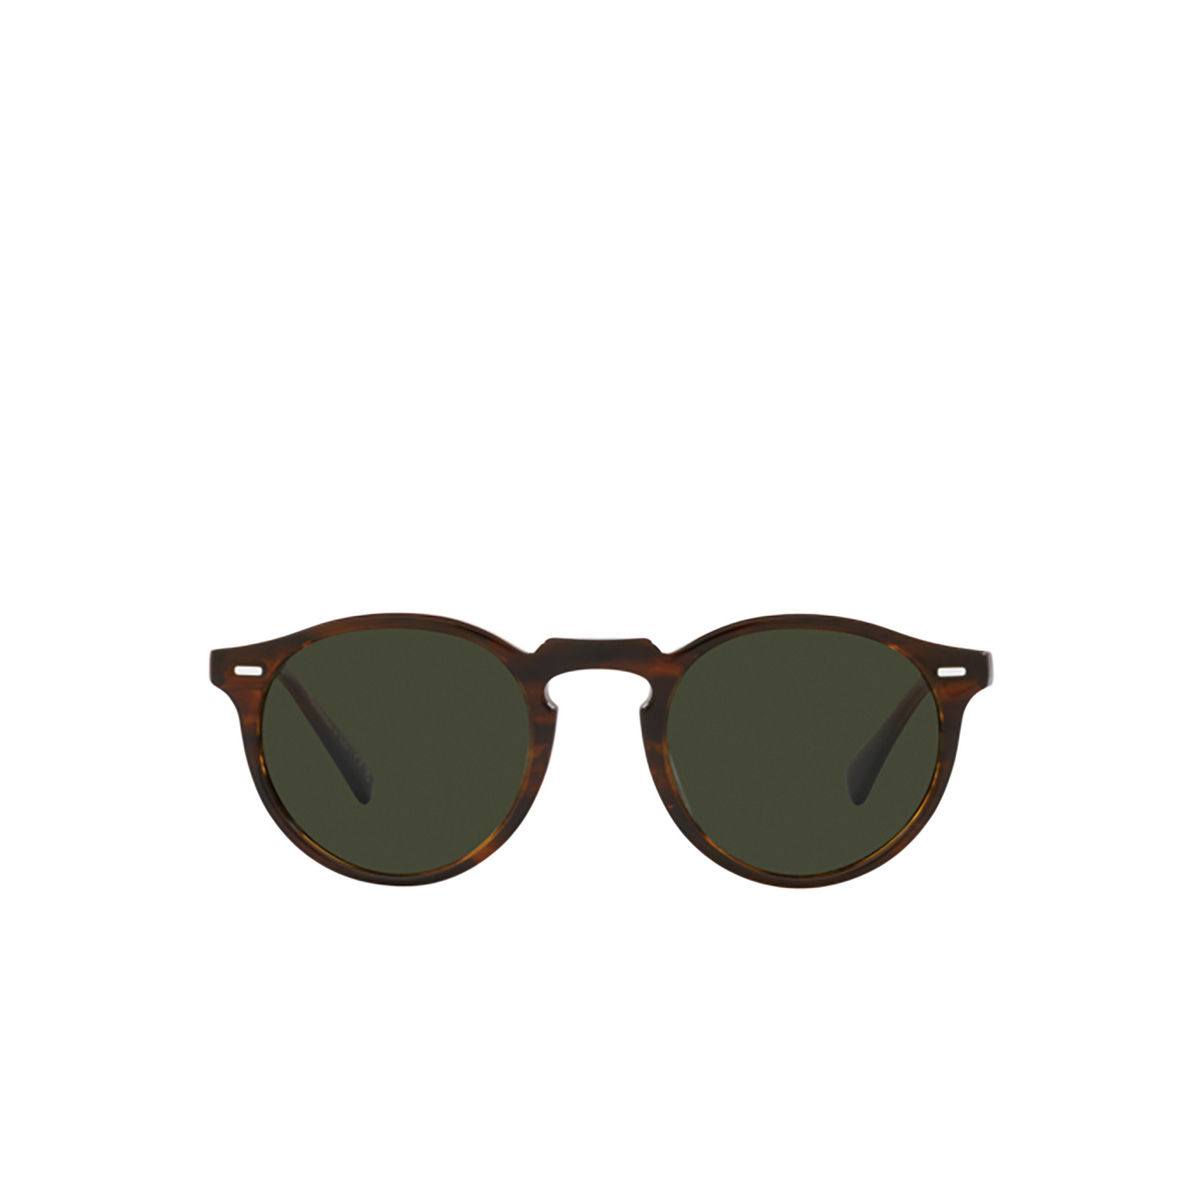 Oliver Peoples GREGORY PECK Sunglasses 1724P1 Tuscany Tortoise - front view